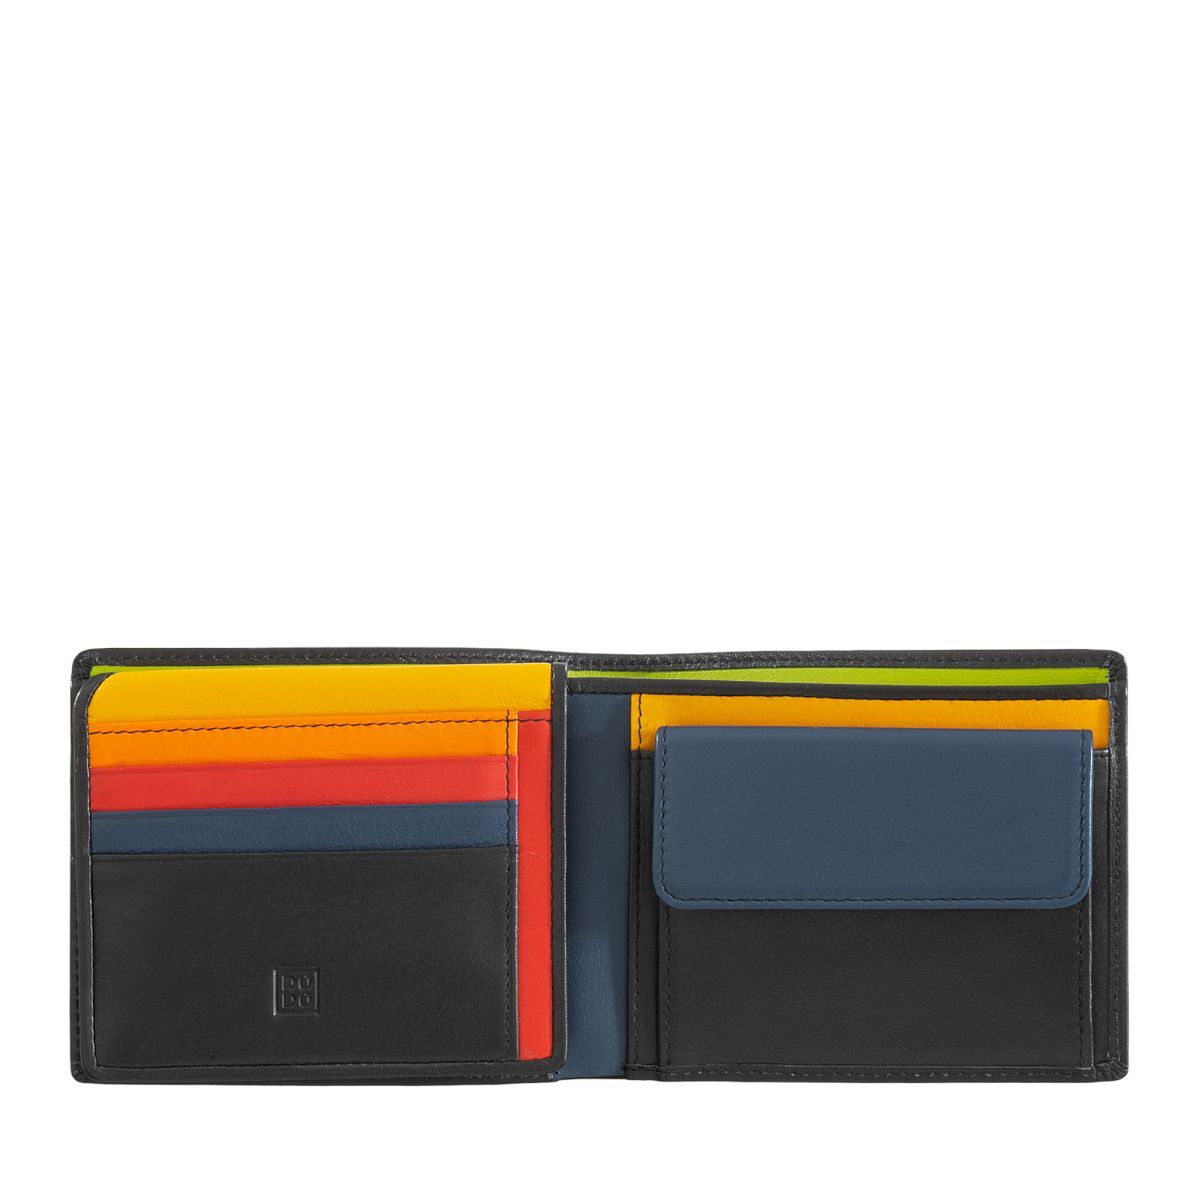 DuDu Leather classic multi color wallet with coin purse and inside flap - Black